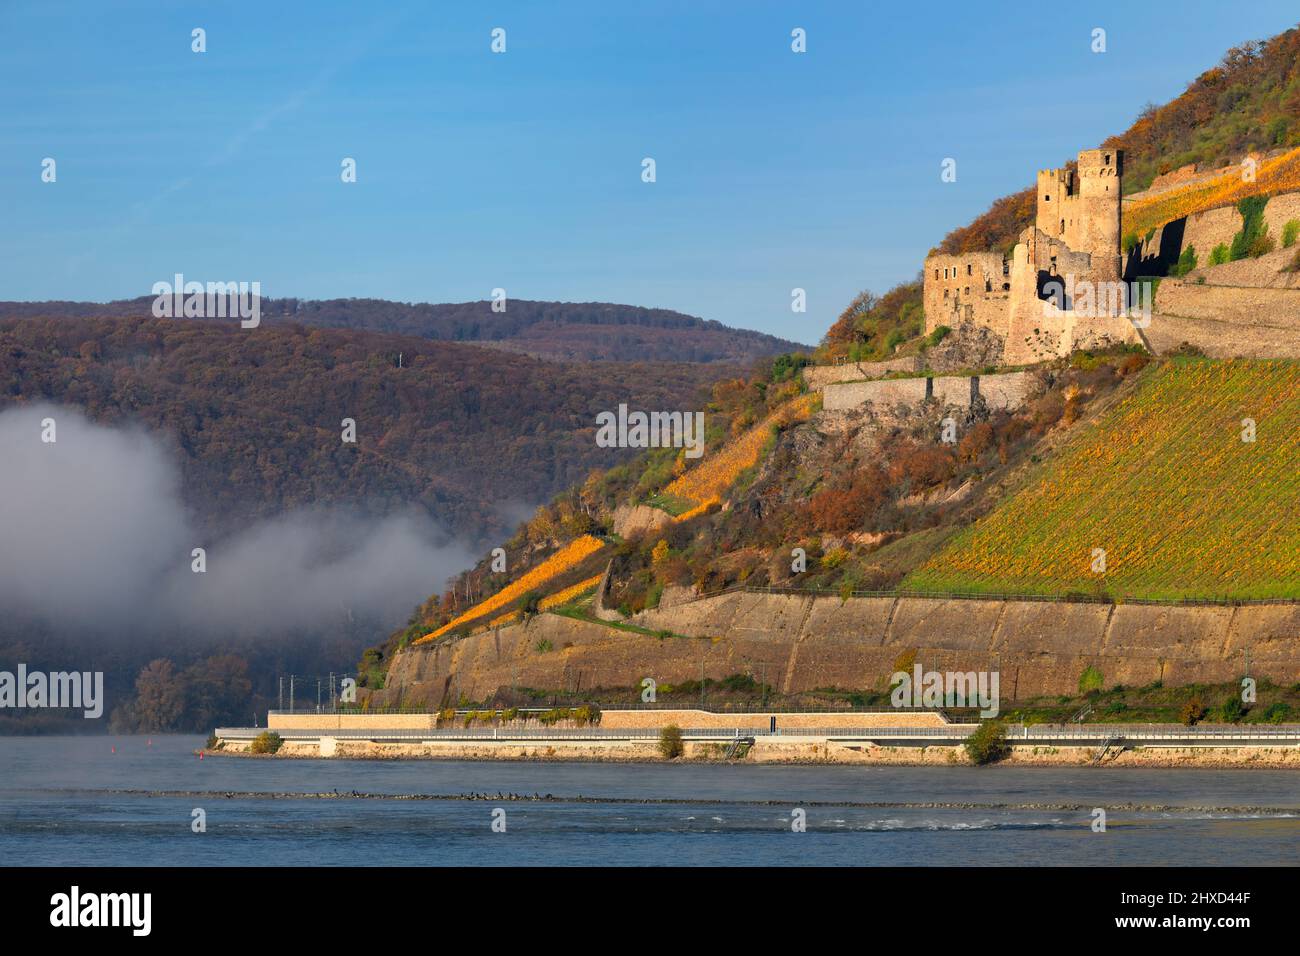 View over the Bingener Loch to the Ehrenfels castle ruin, Upper Middle Rhine Valley, Rhineland-Palatinate, Germany Stock Photo